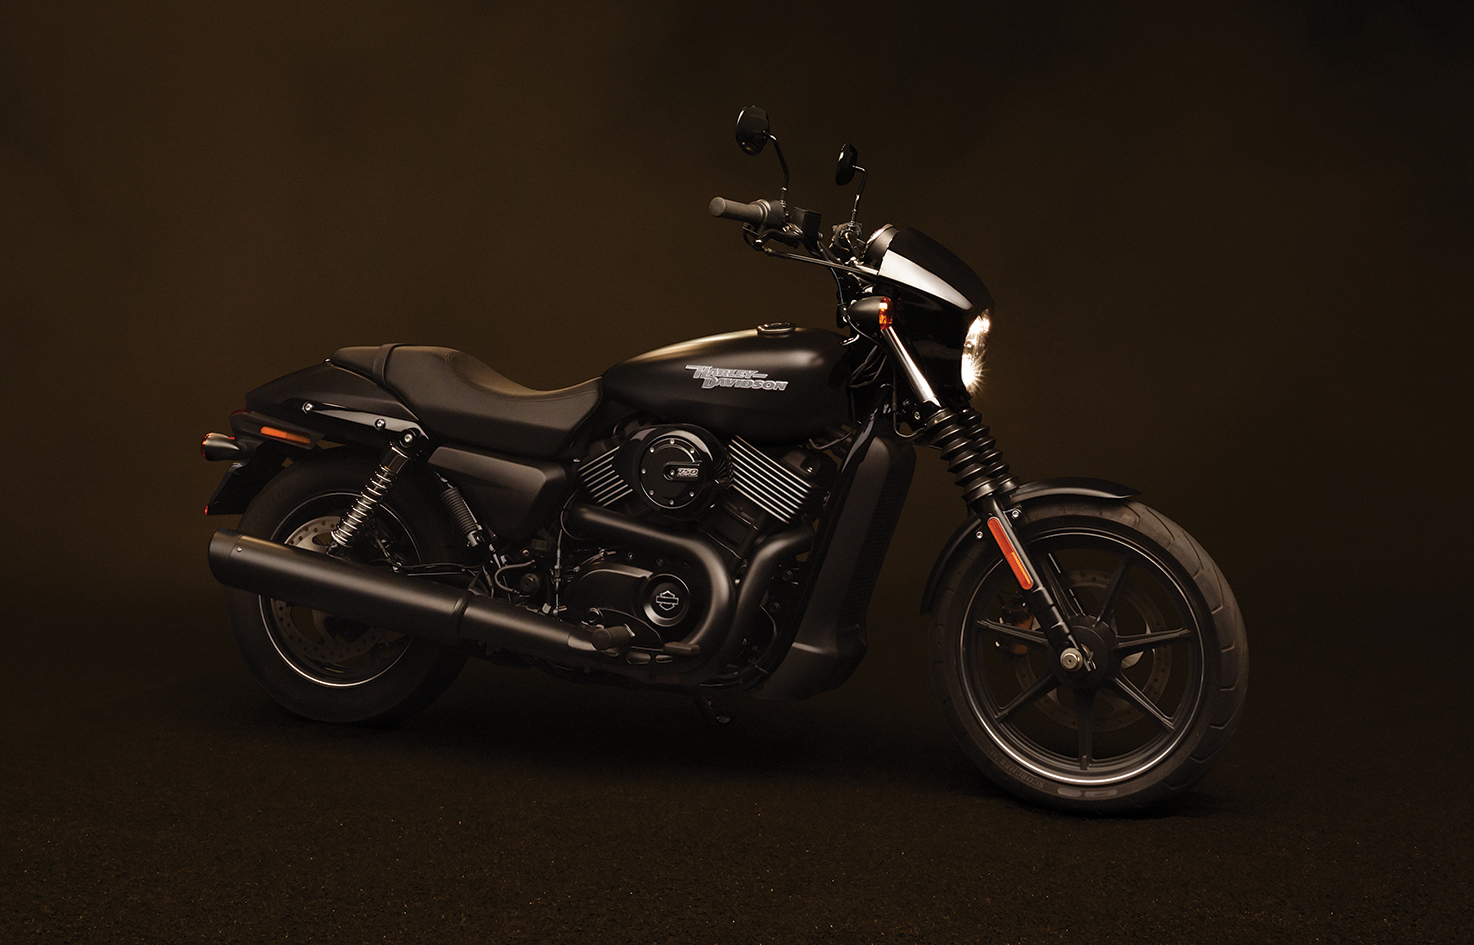 Harley Davidson Street Bikes Now Available Via Csd With Up To Inr 90k Savings